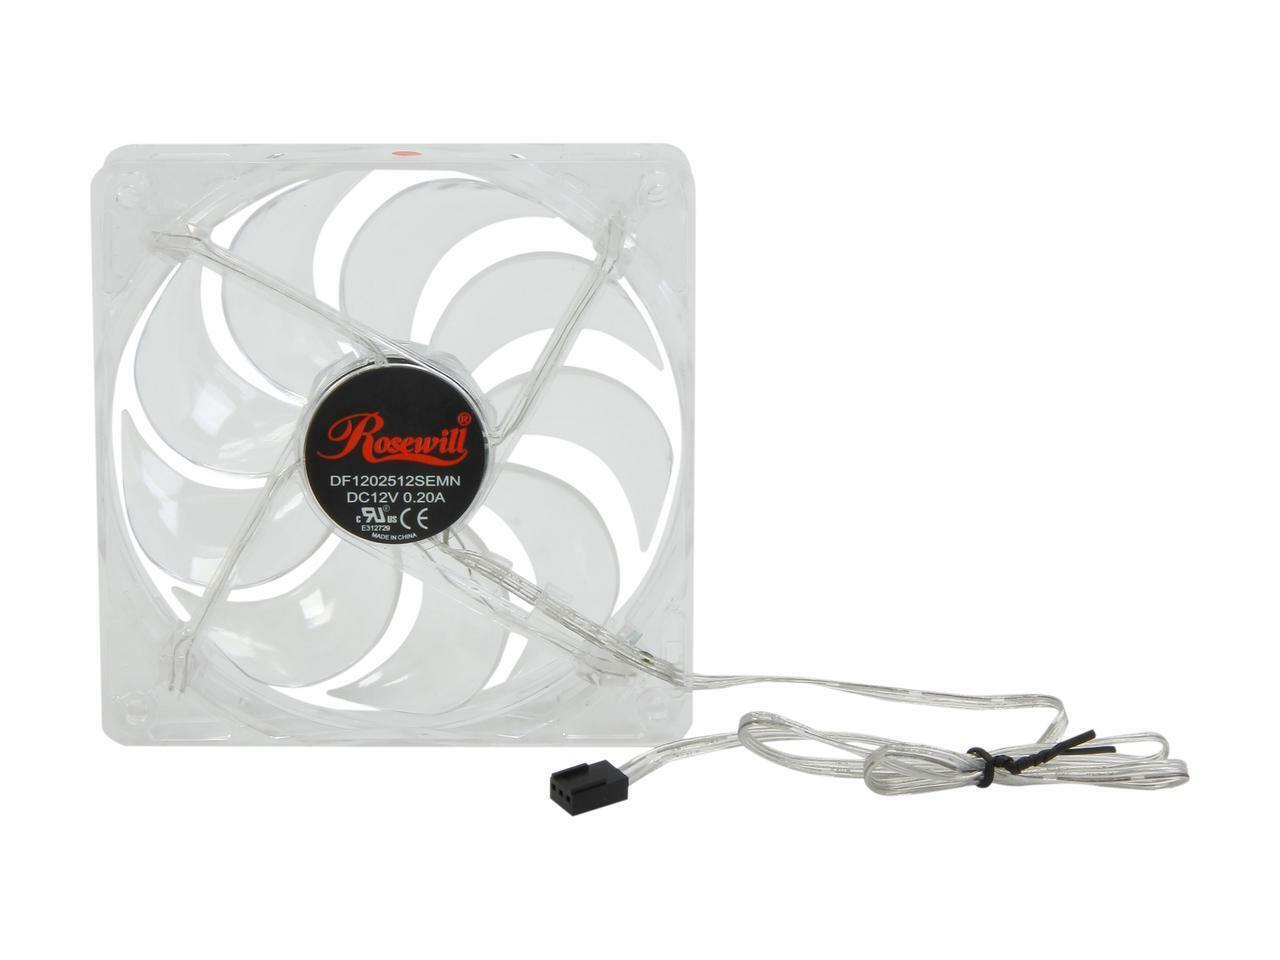 Rosewill 120mm Computer Case Cooling Fan w/ Red LED lights (RFTL-131209R)